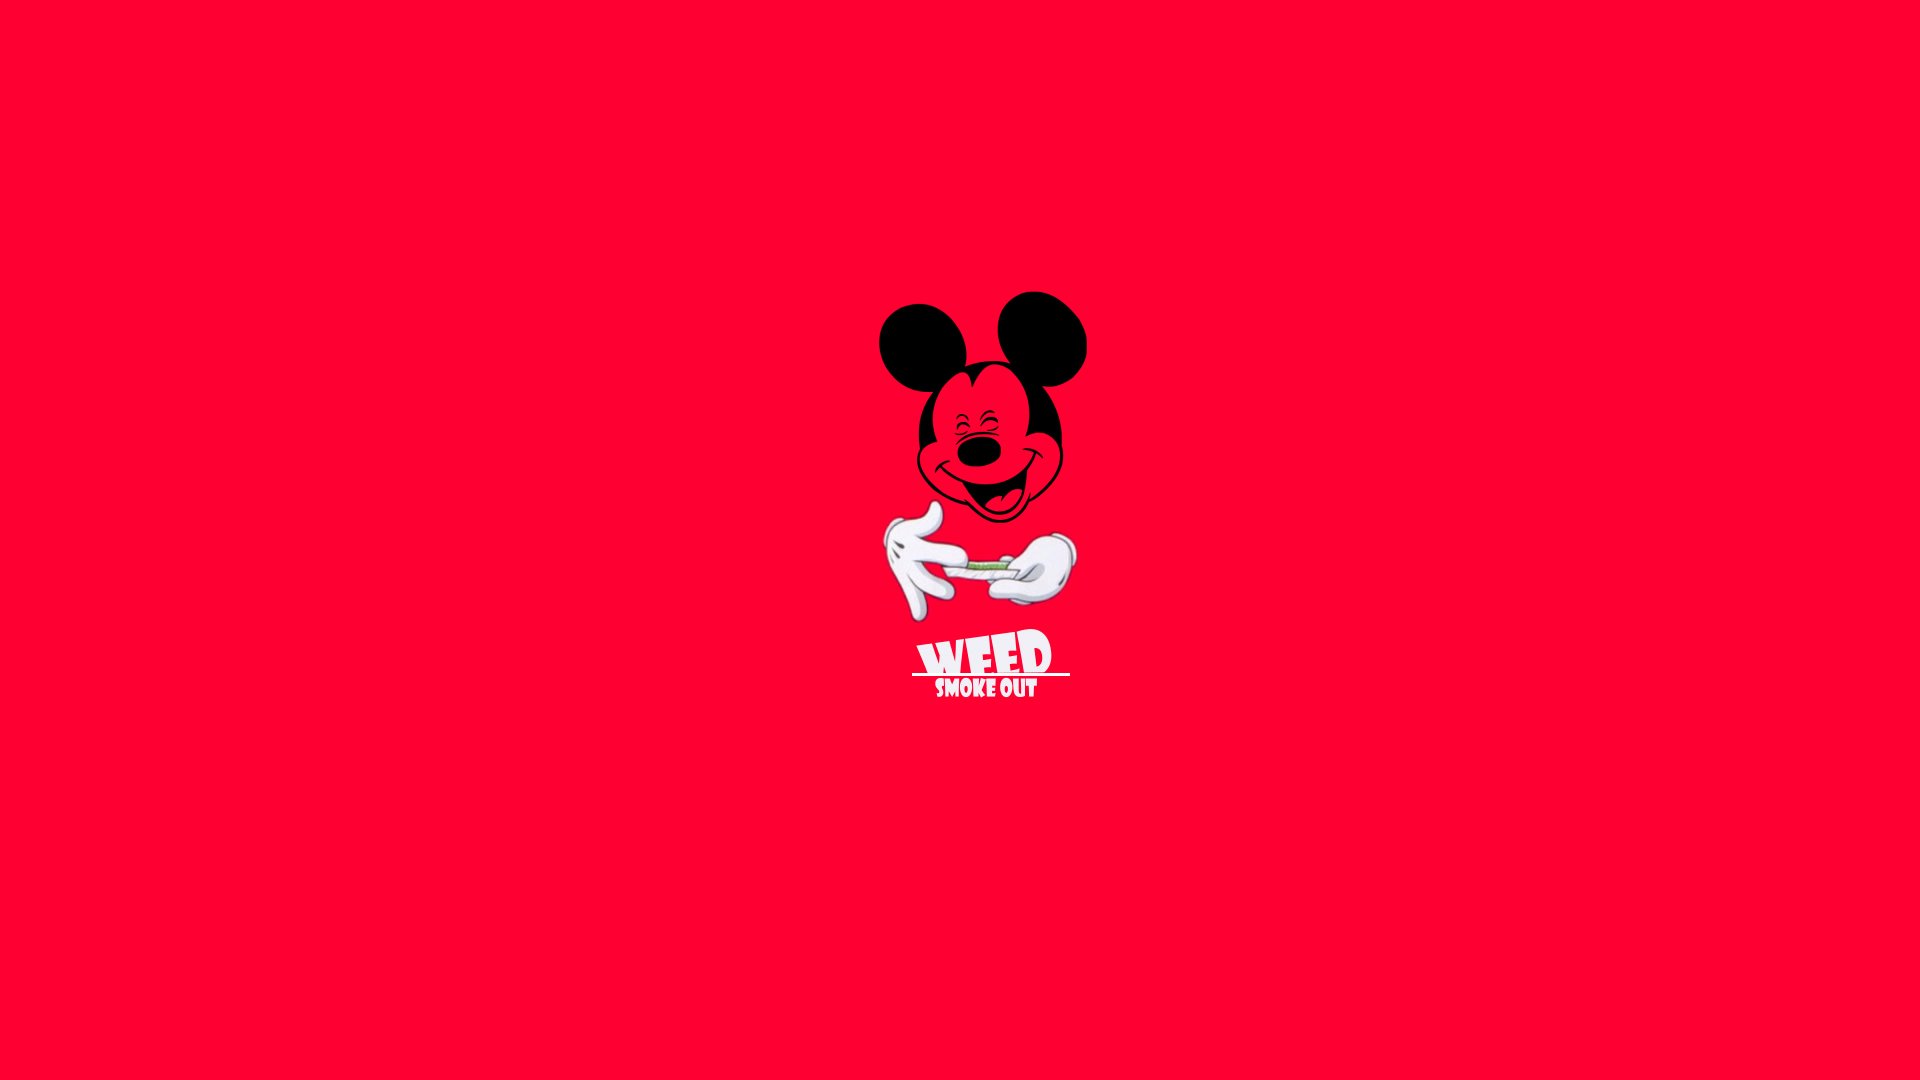 Download wallpaper Smoke, Mickey Mouse, Swag, Kanabis, Weed, section minimalism in resolution 1920x1080